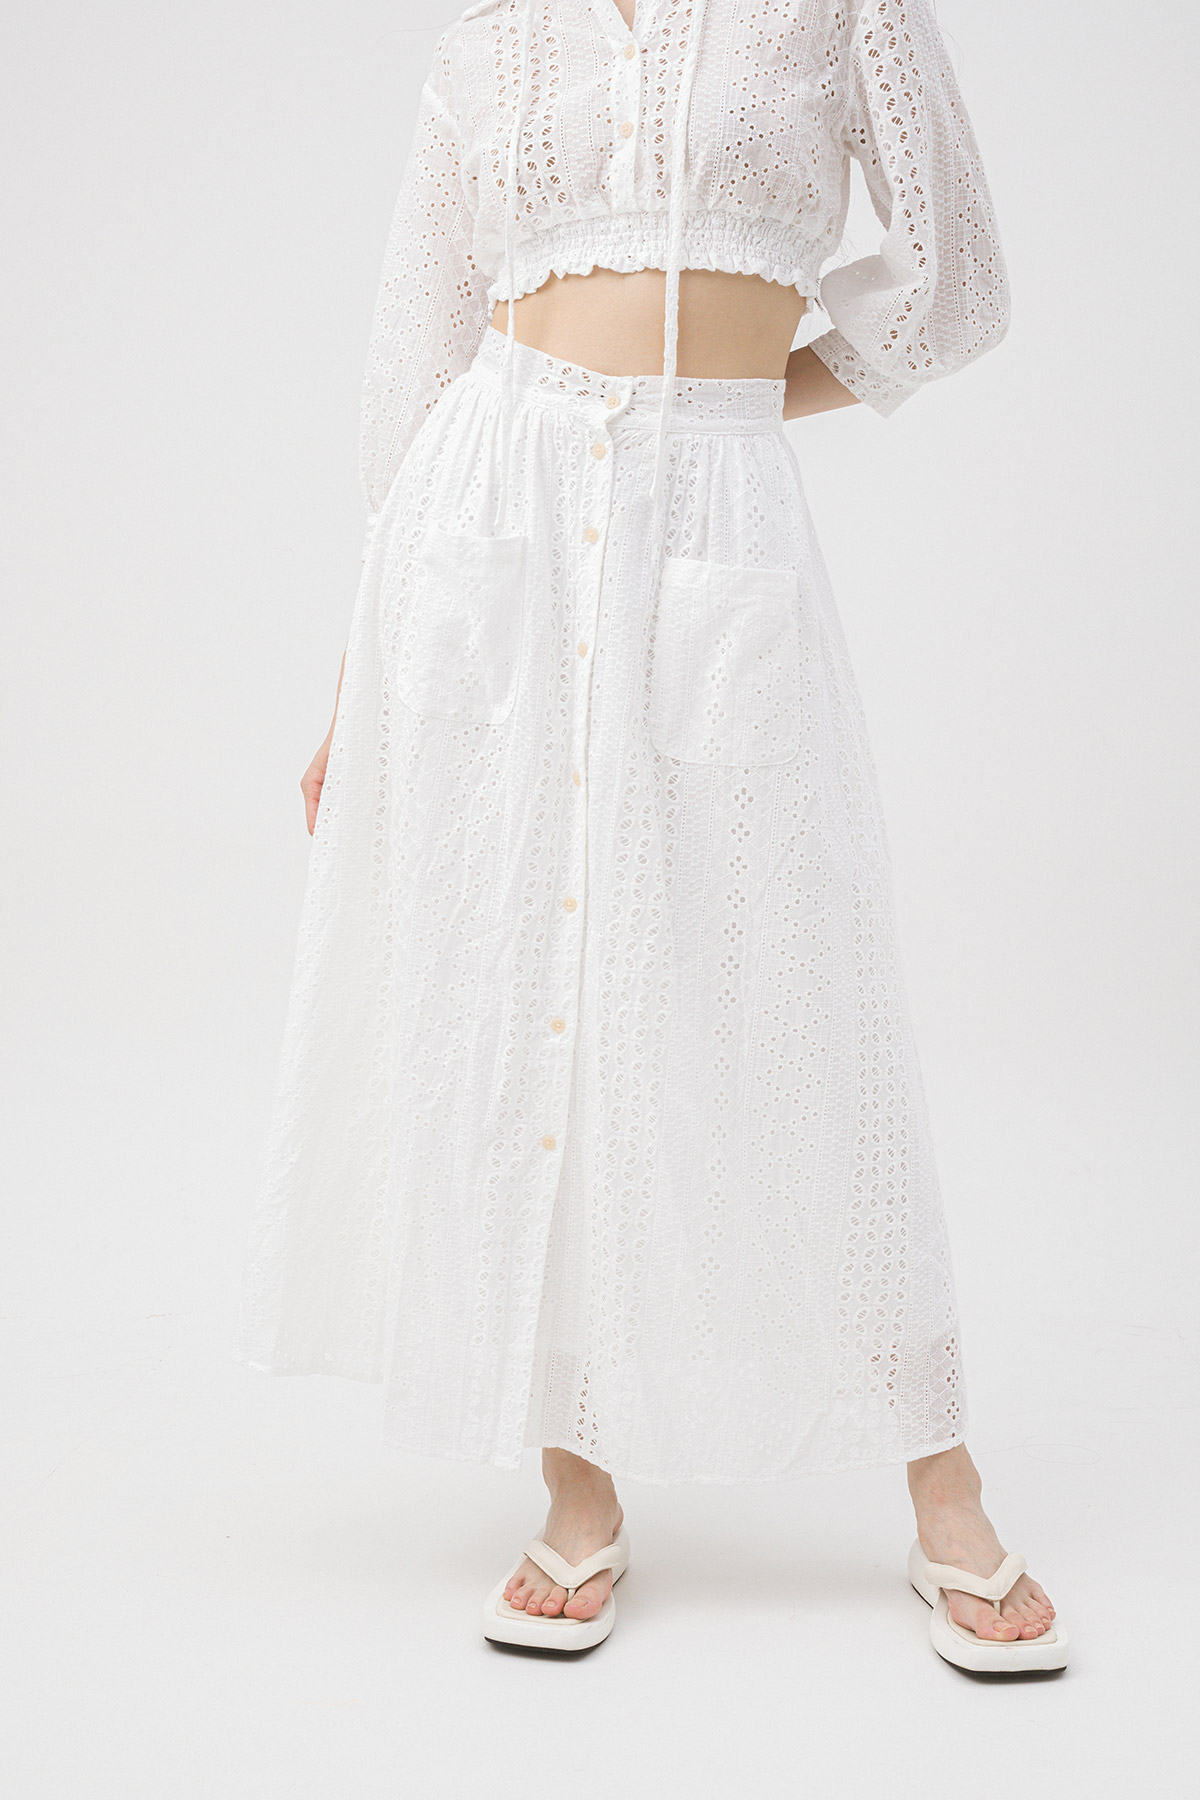 DOROTHEE SKIRT - PALMETTO [BY MODPARADE]